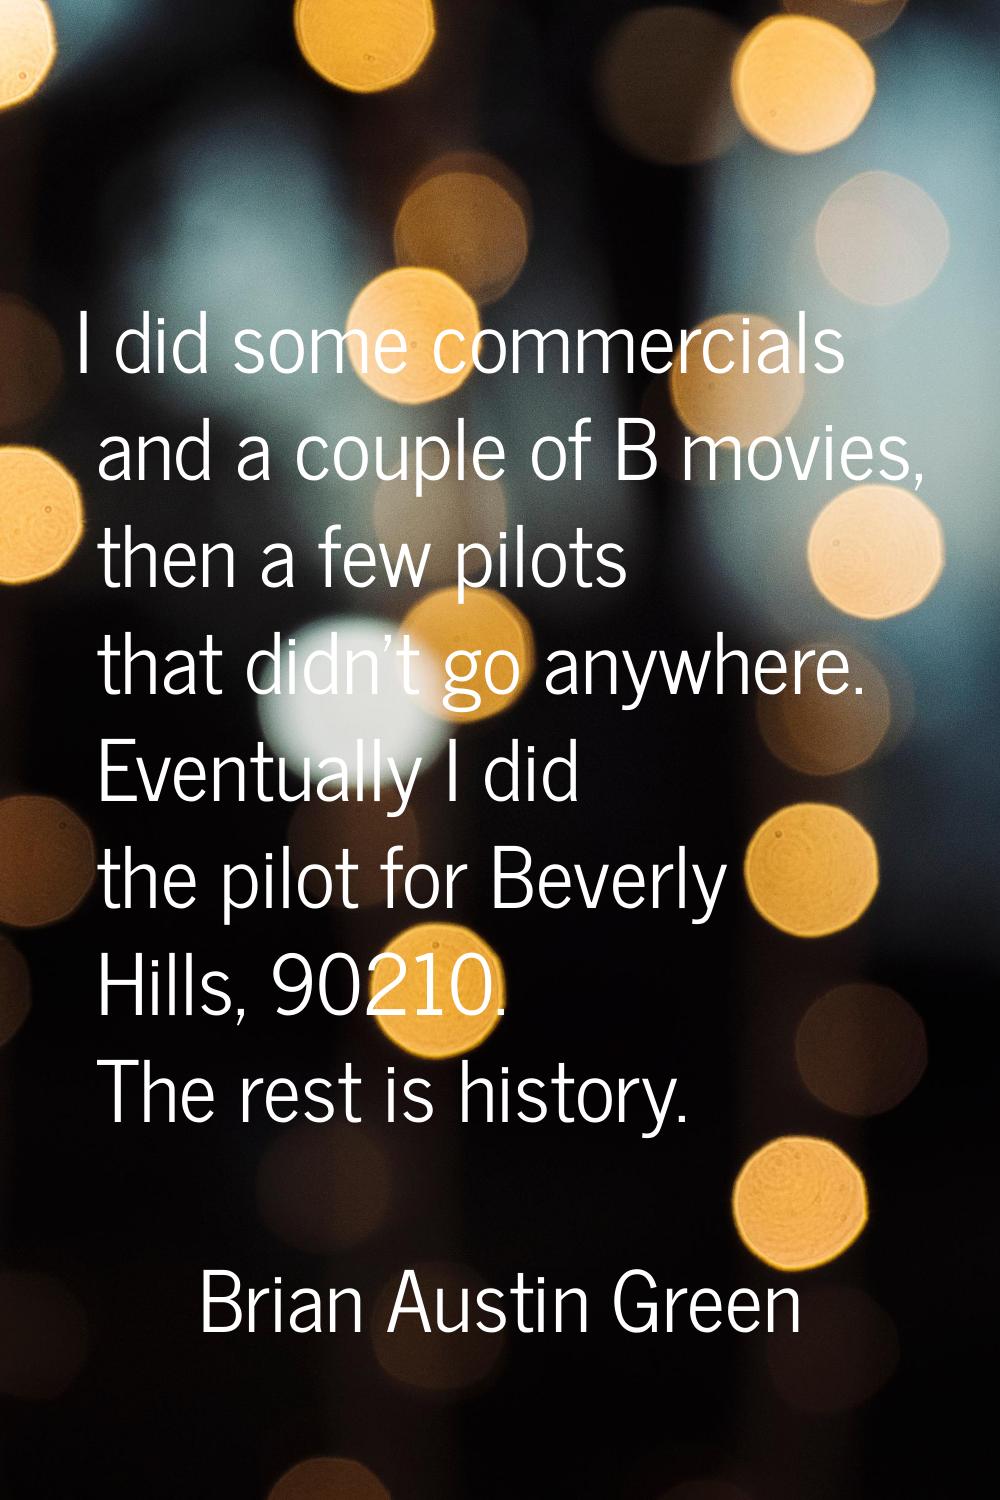 I did some commercials and a couple of B movies, then a few pilots that didn't go anywhere. Eventua